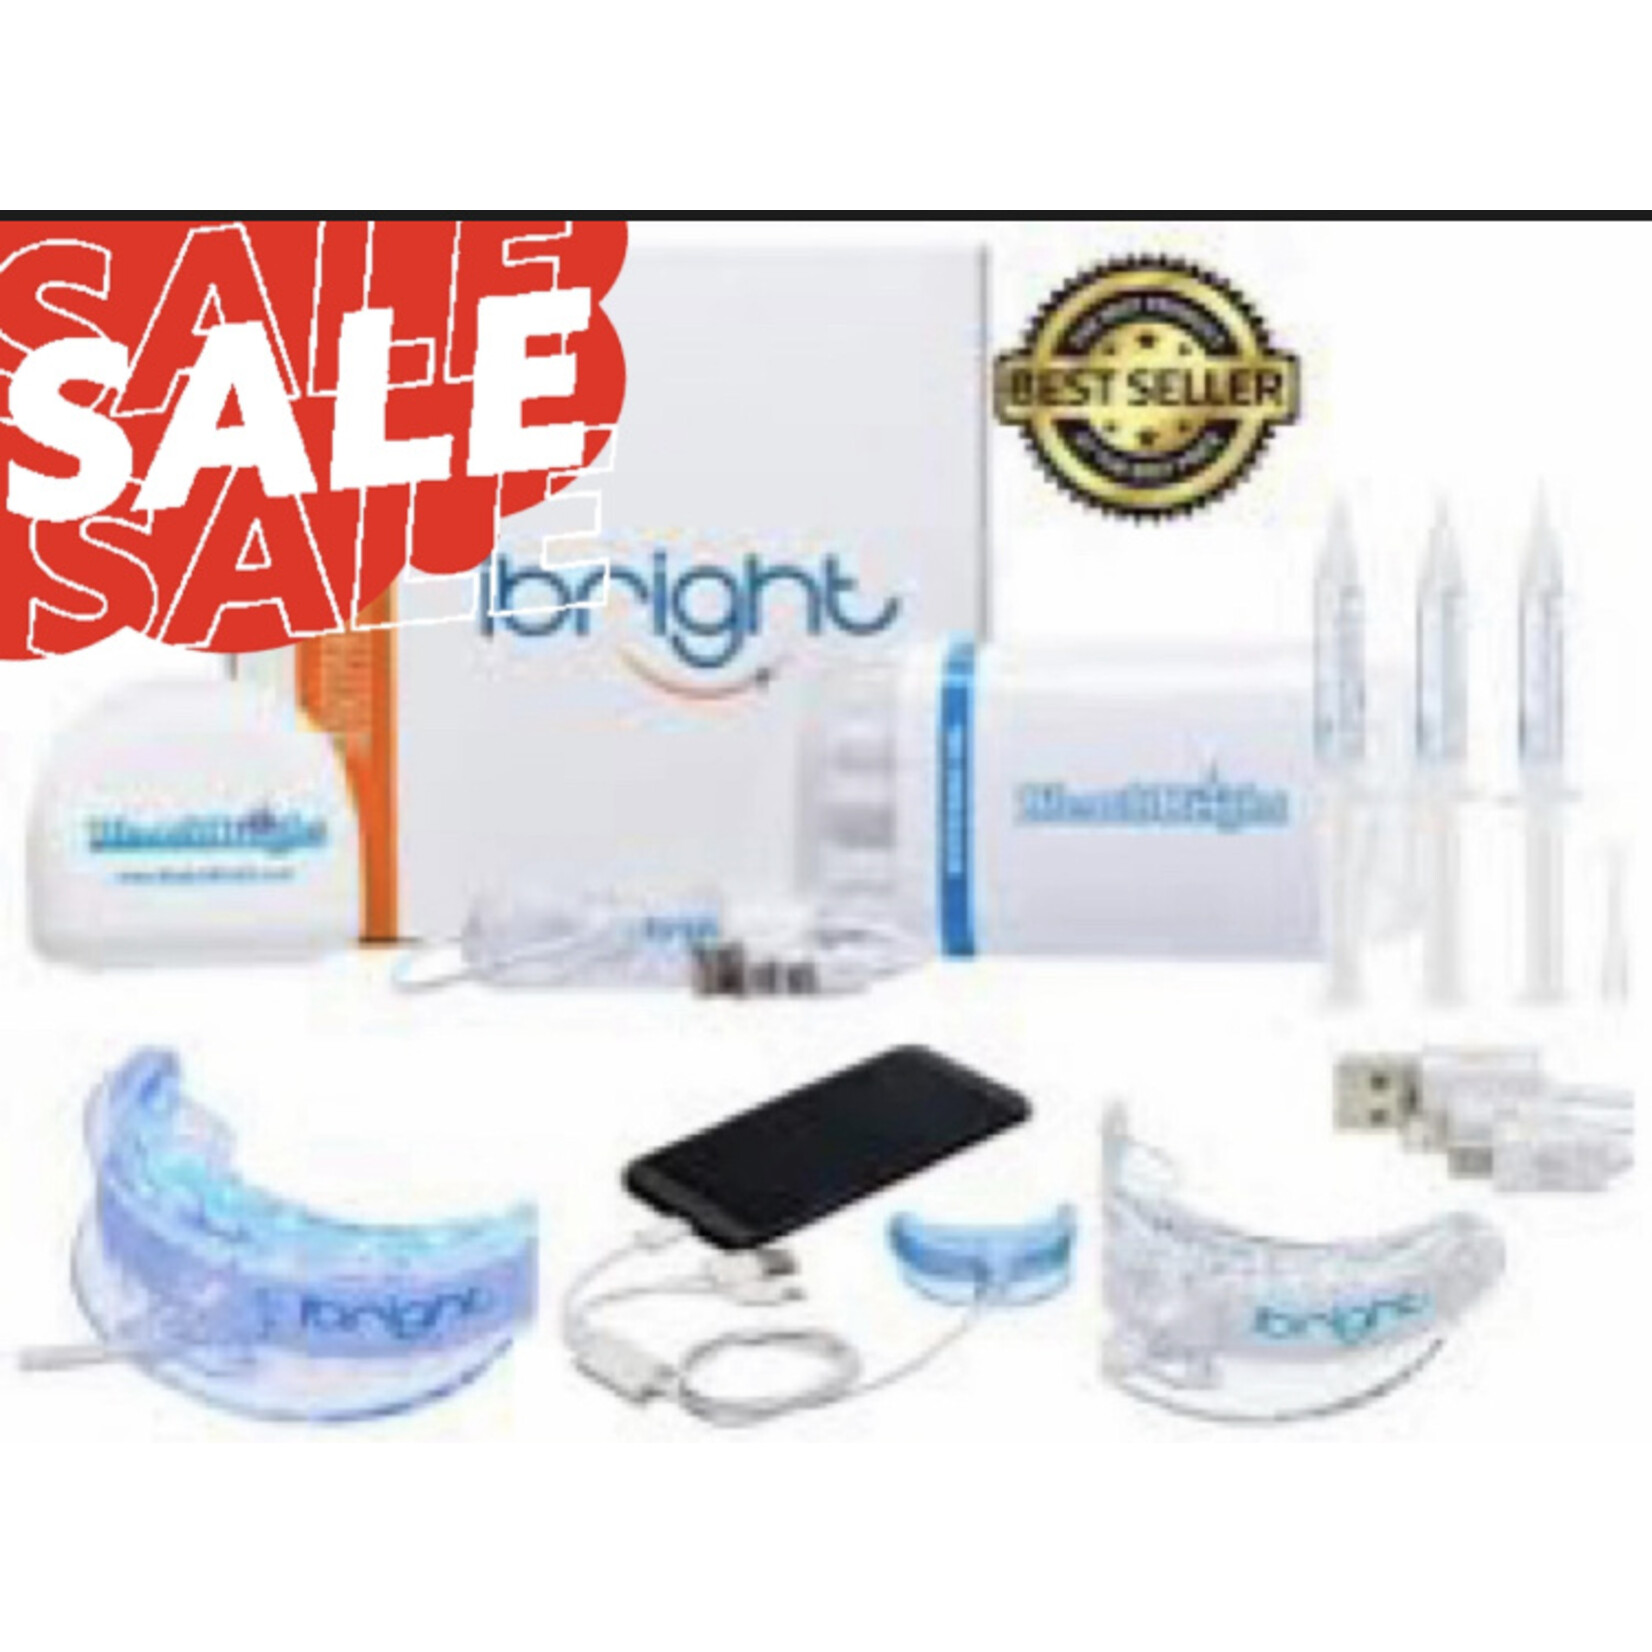 ibright SALE $20 OFF ibright Smartphone Whitening System -iPhone, Android & USB